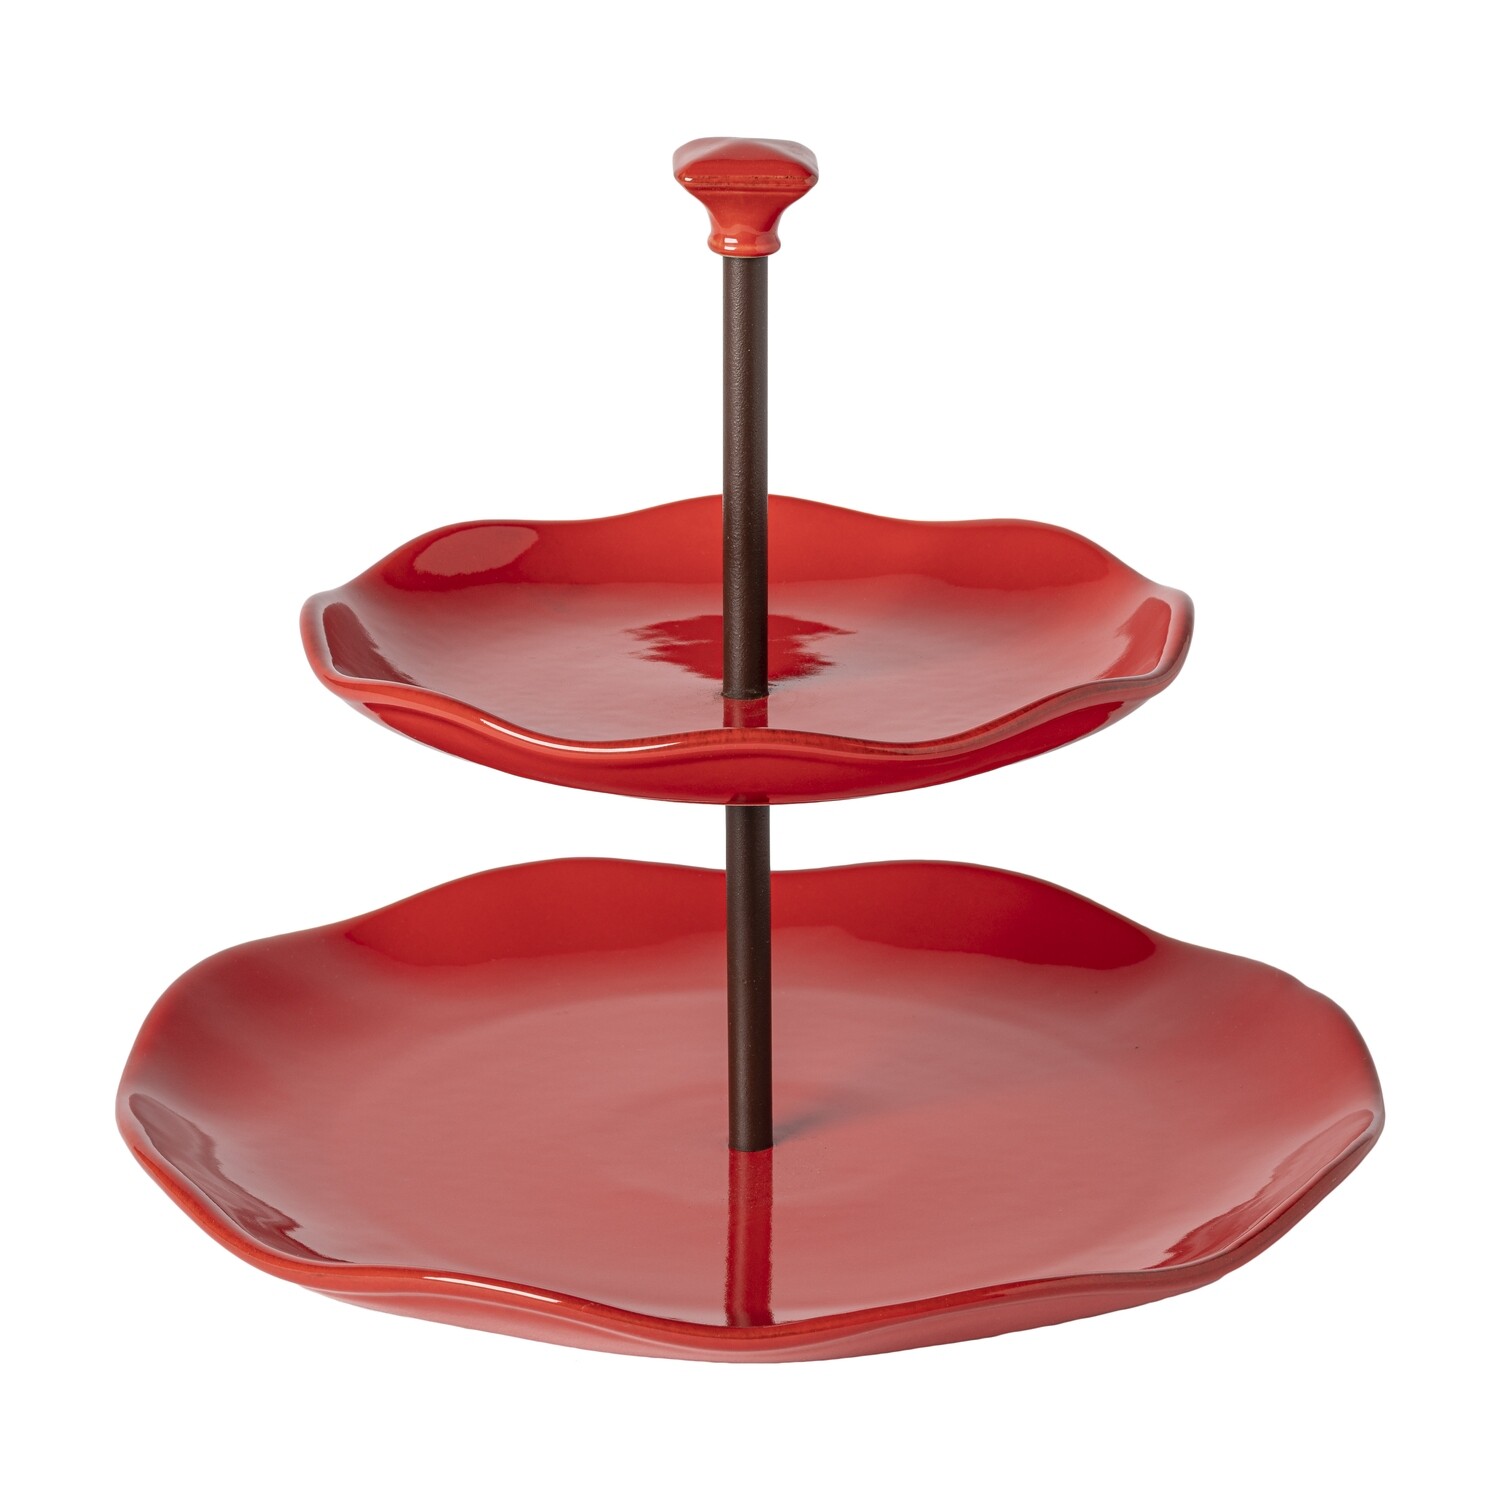 Two Tiered Server - Red